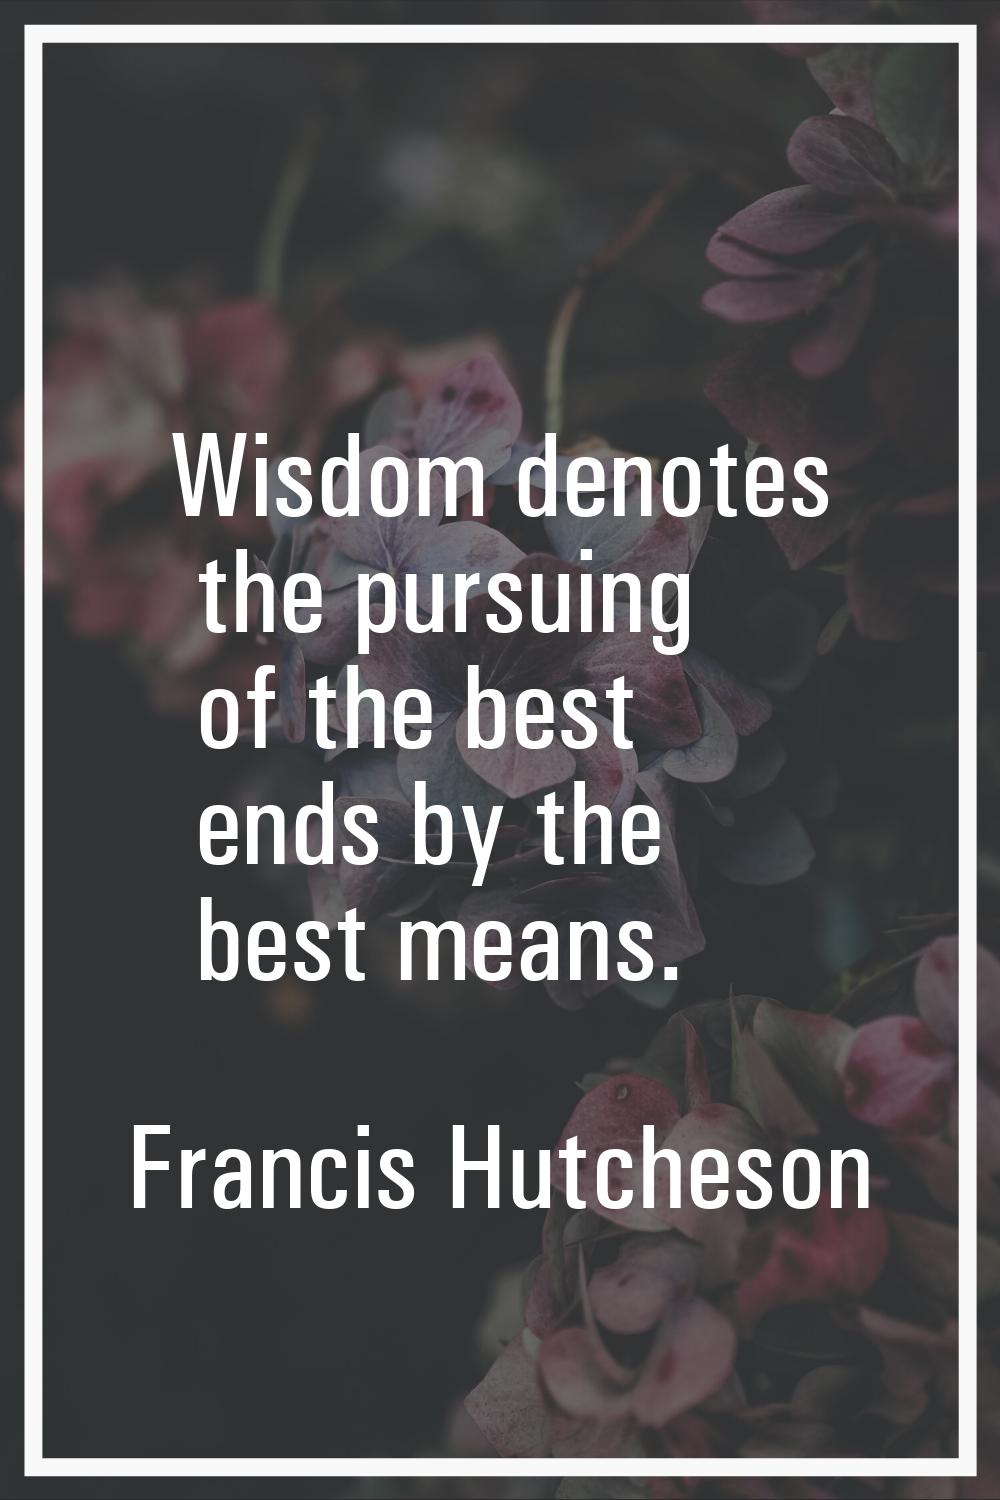 Wisdom denotes the pursuing of the best ends by the best means.